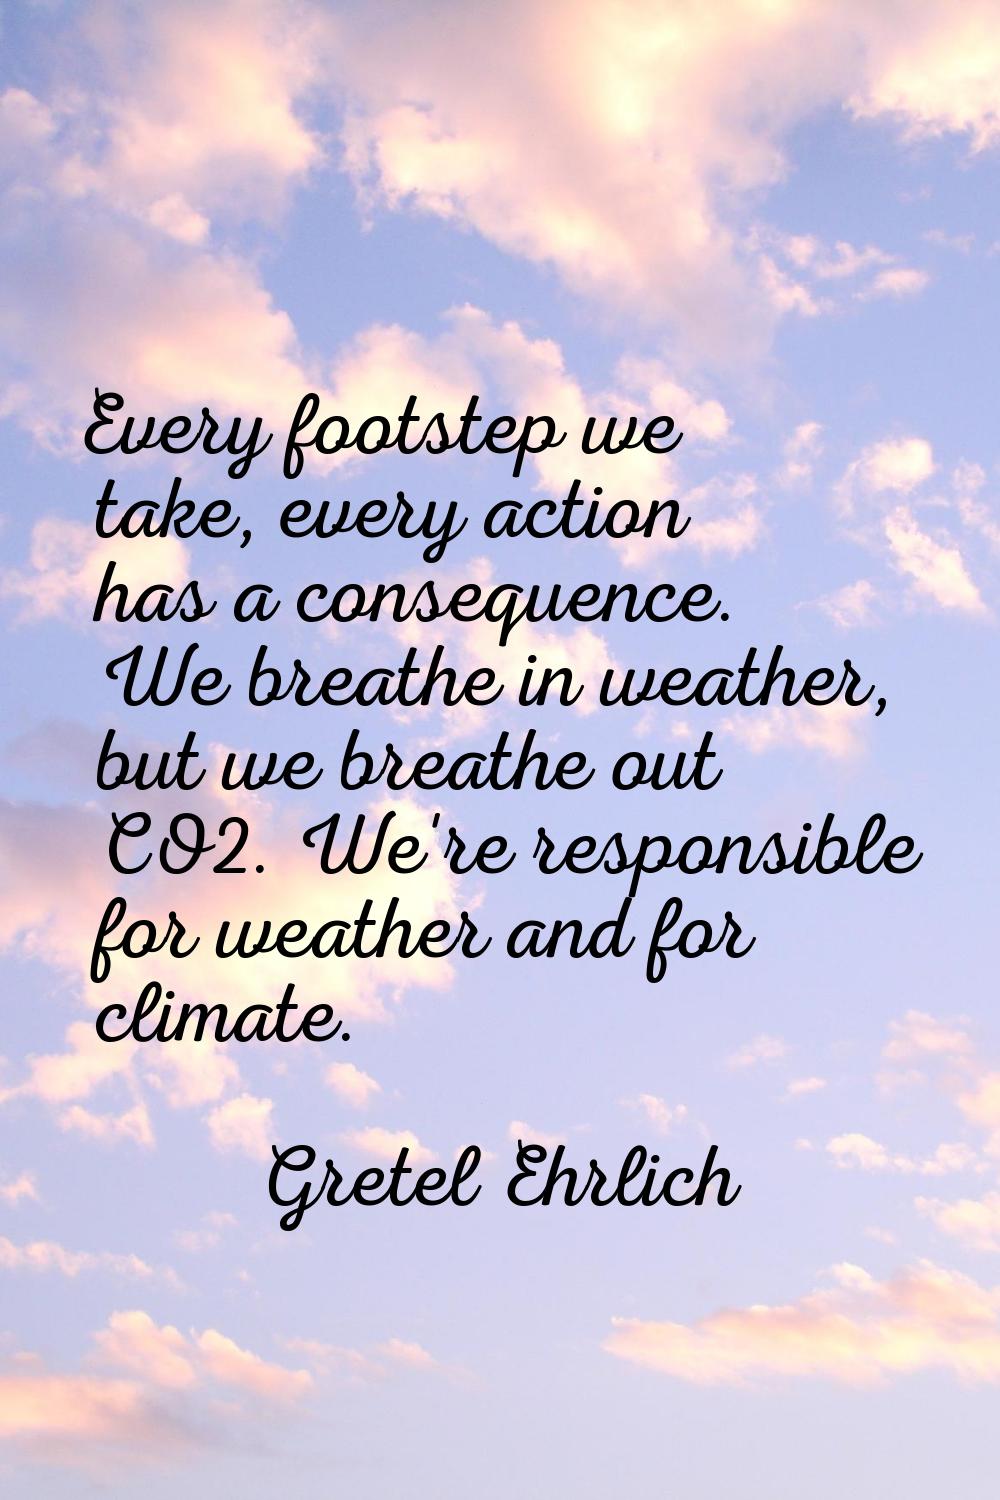 Every footstep we take, every action has a consequence. We breathe in weather, but we breathe out C